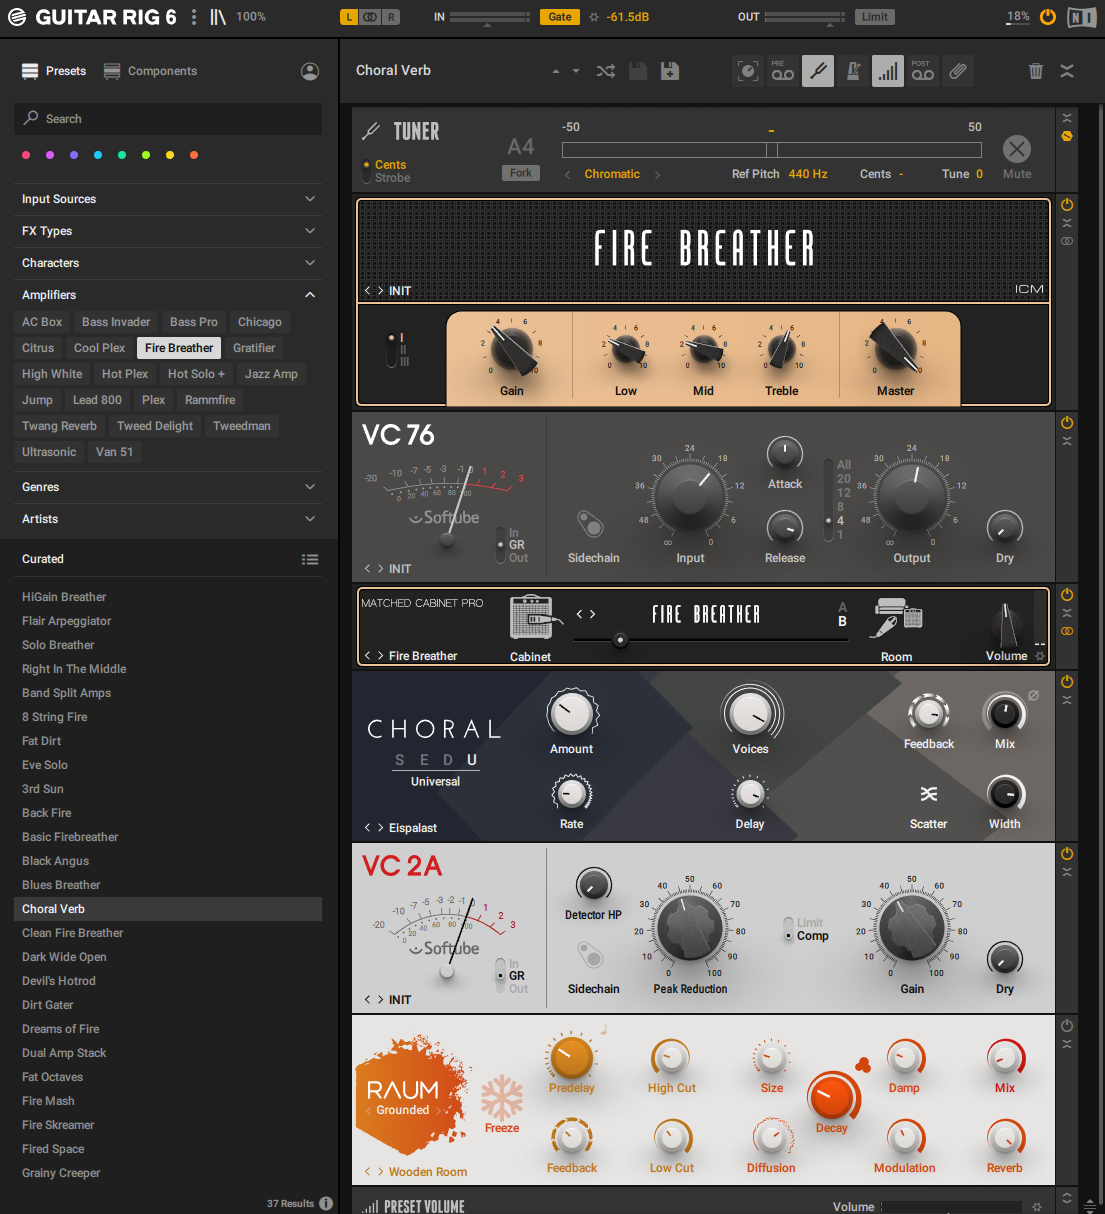 download the new version for android Guitar Rig 6 Pro 6.4.0